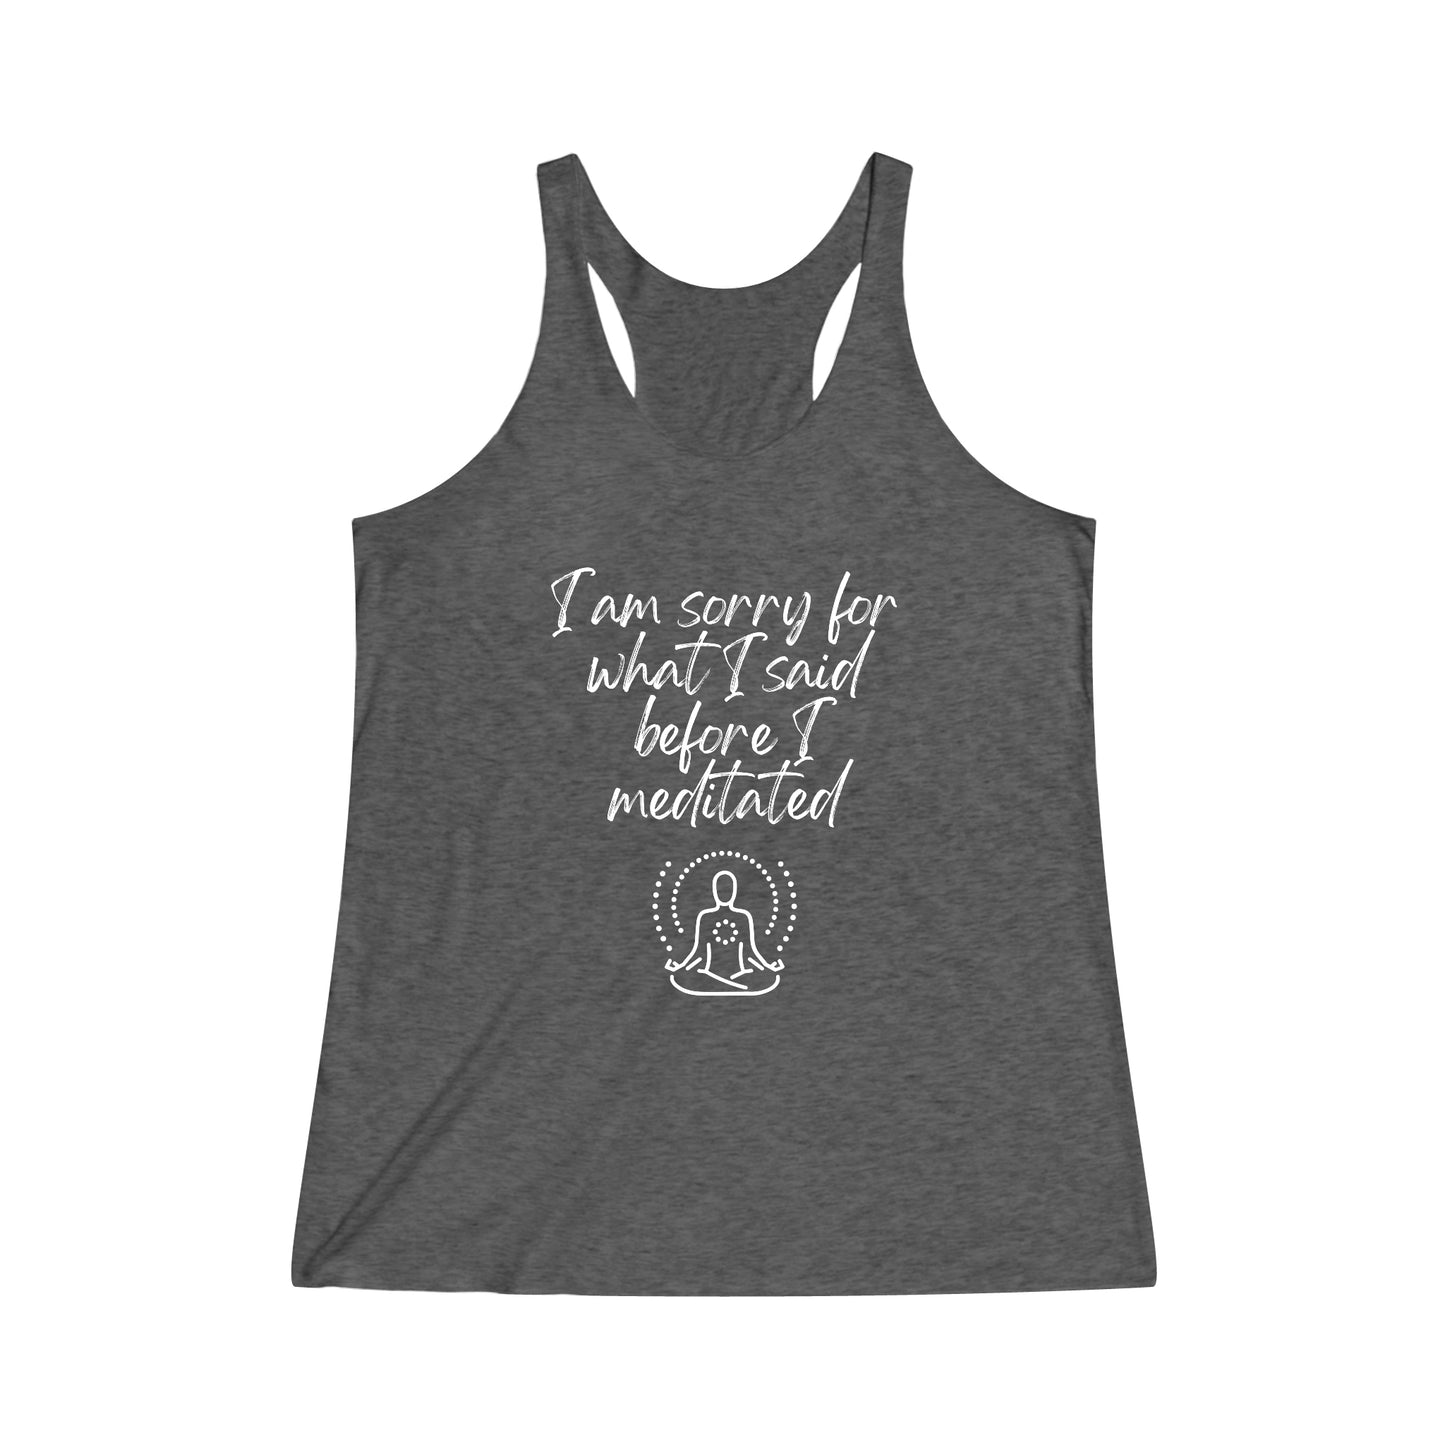 I am sorry for what I said before I meditated! Women's Tri-Blend Racerback Inspirational Tank top